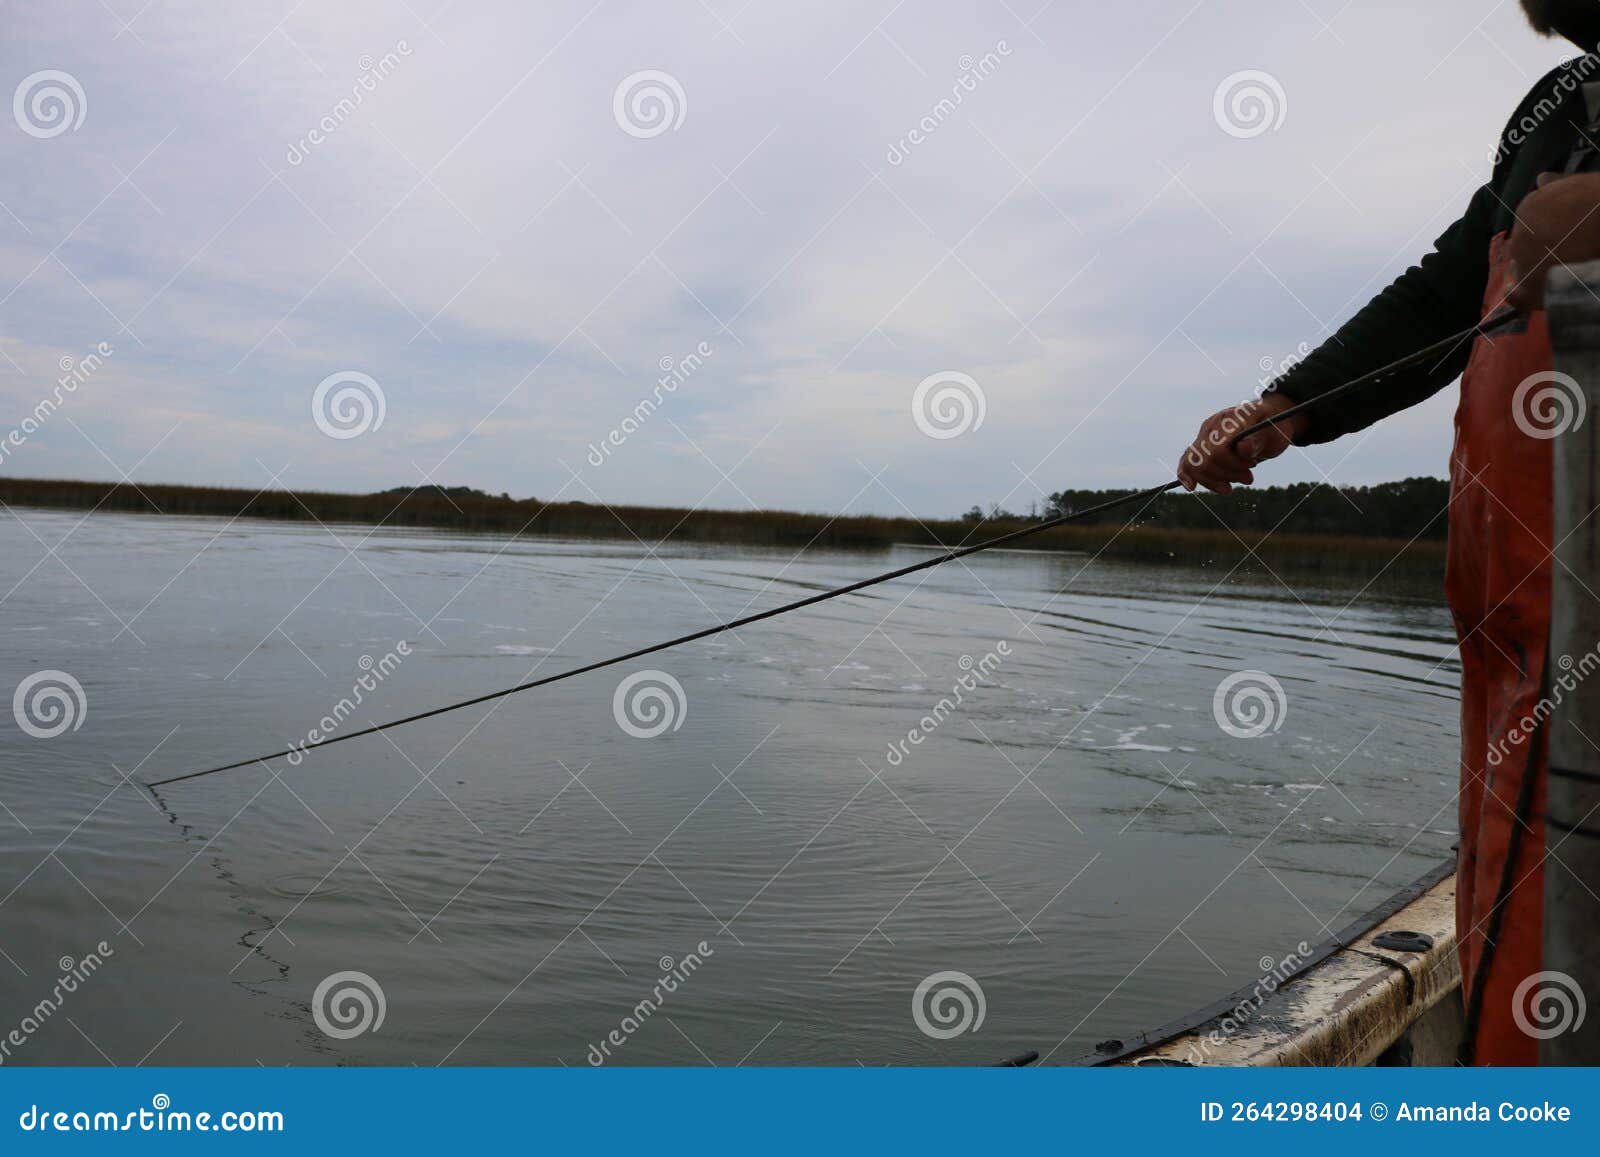 Fisherman Pulling Up a Blue Crab Trap with Rope and Bouy in Hand